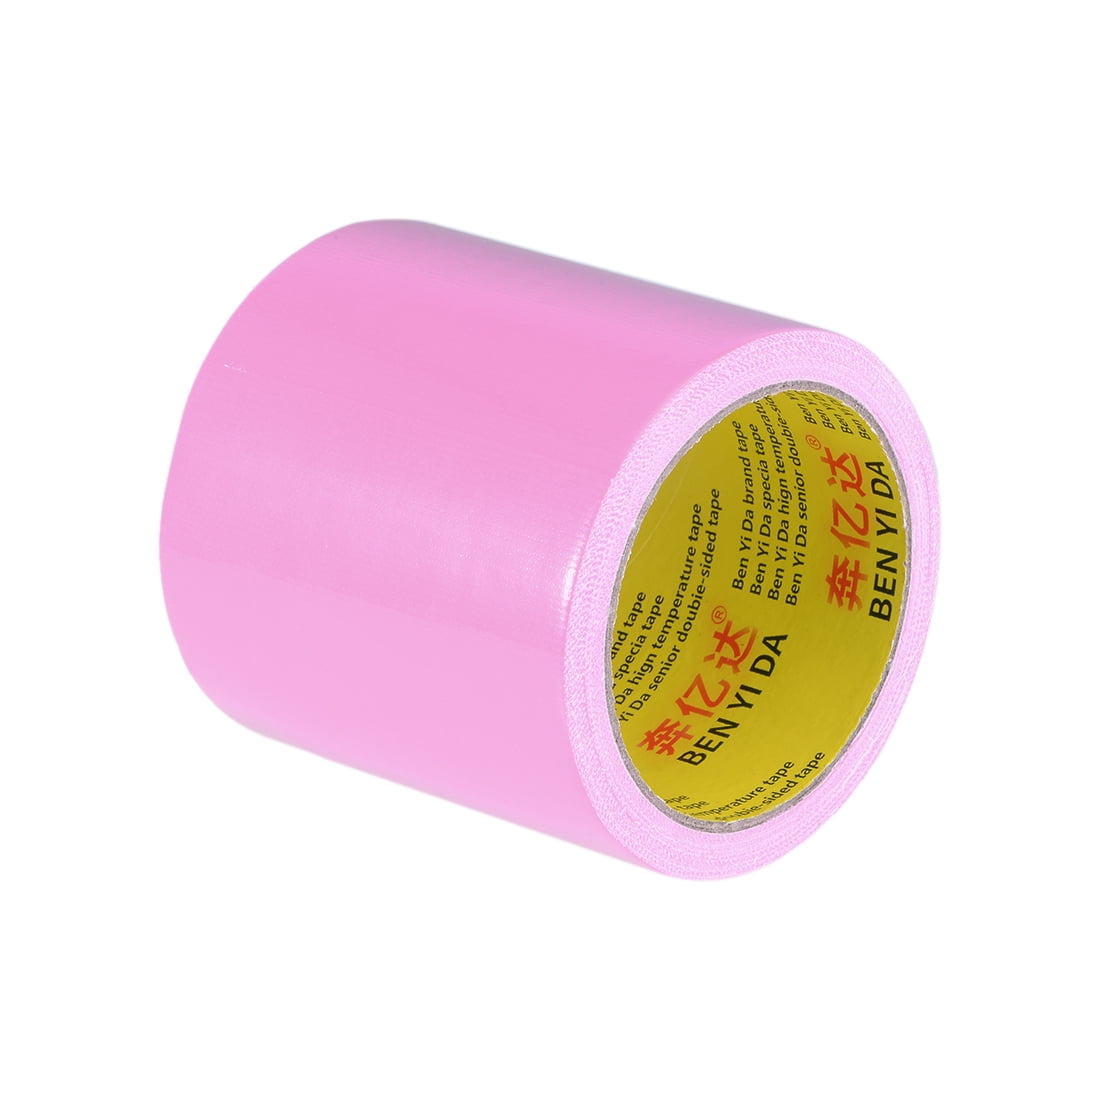 Cloth Duct Tape Side Adhesive Tape for Home Improvement, Repairs, 33 Ft x Inch(LxW), Pink - Walmart.com